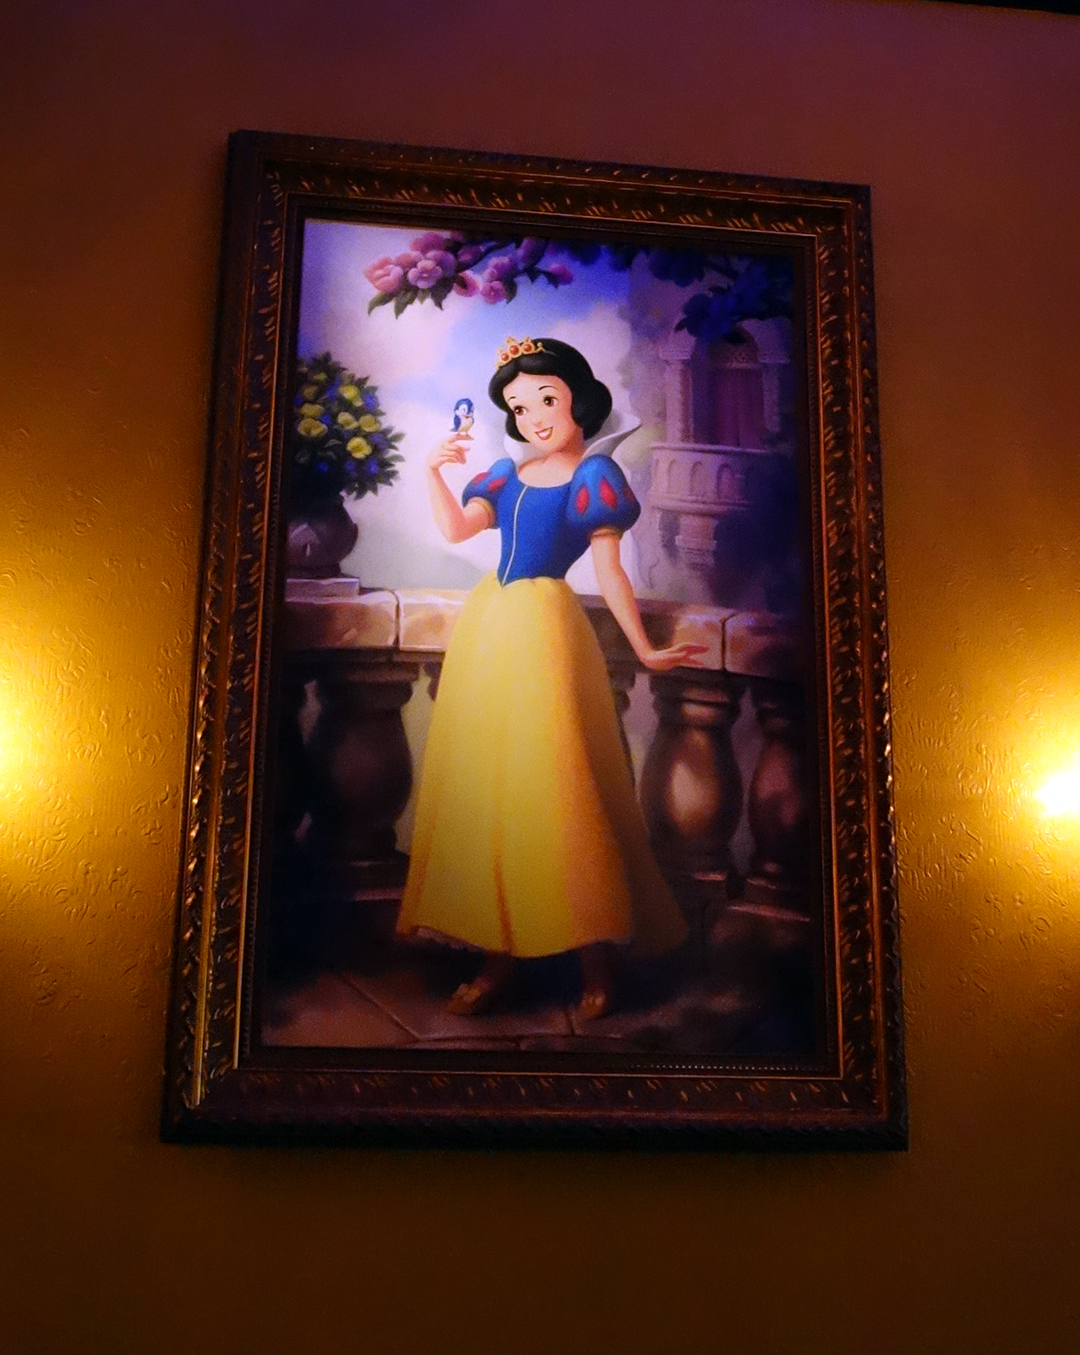 To meet Snow White, get in the Rapunzel line!